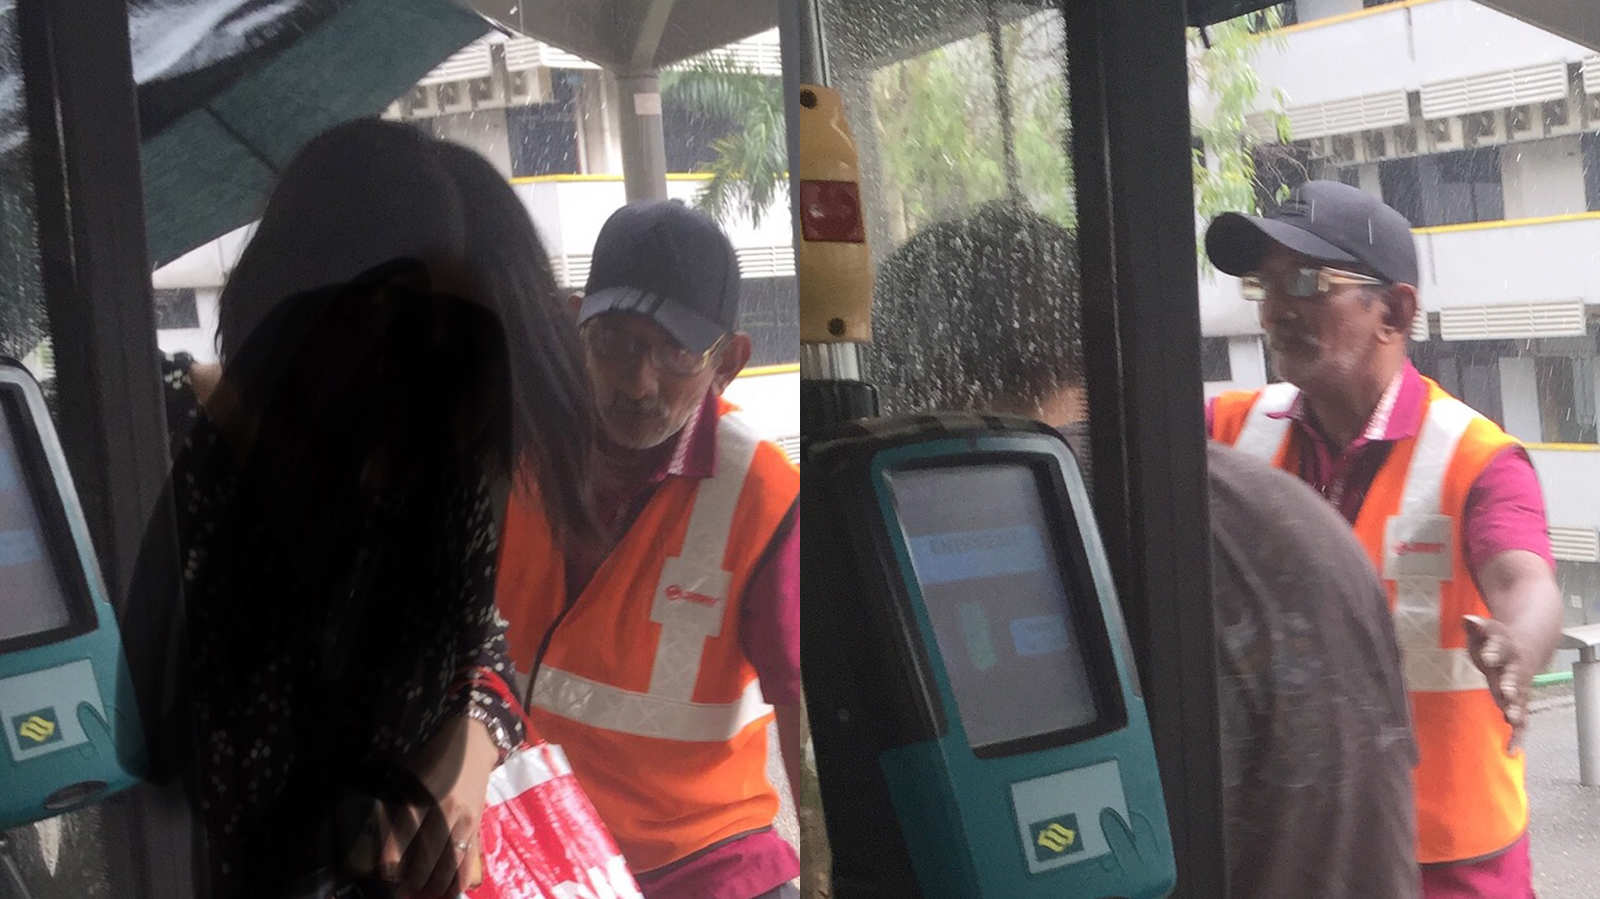 Bus captain goes out of his way to keep passengers dry in the rain